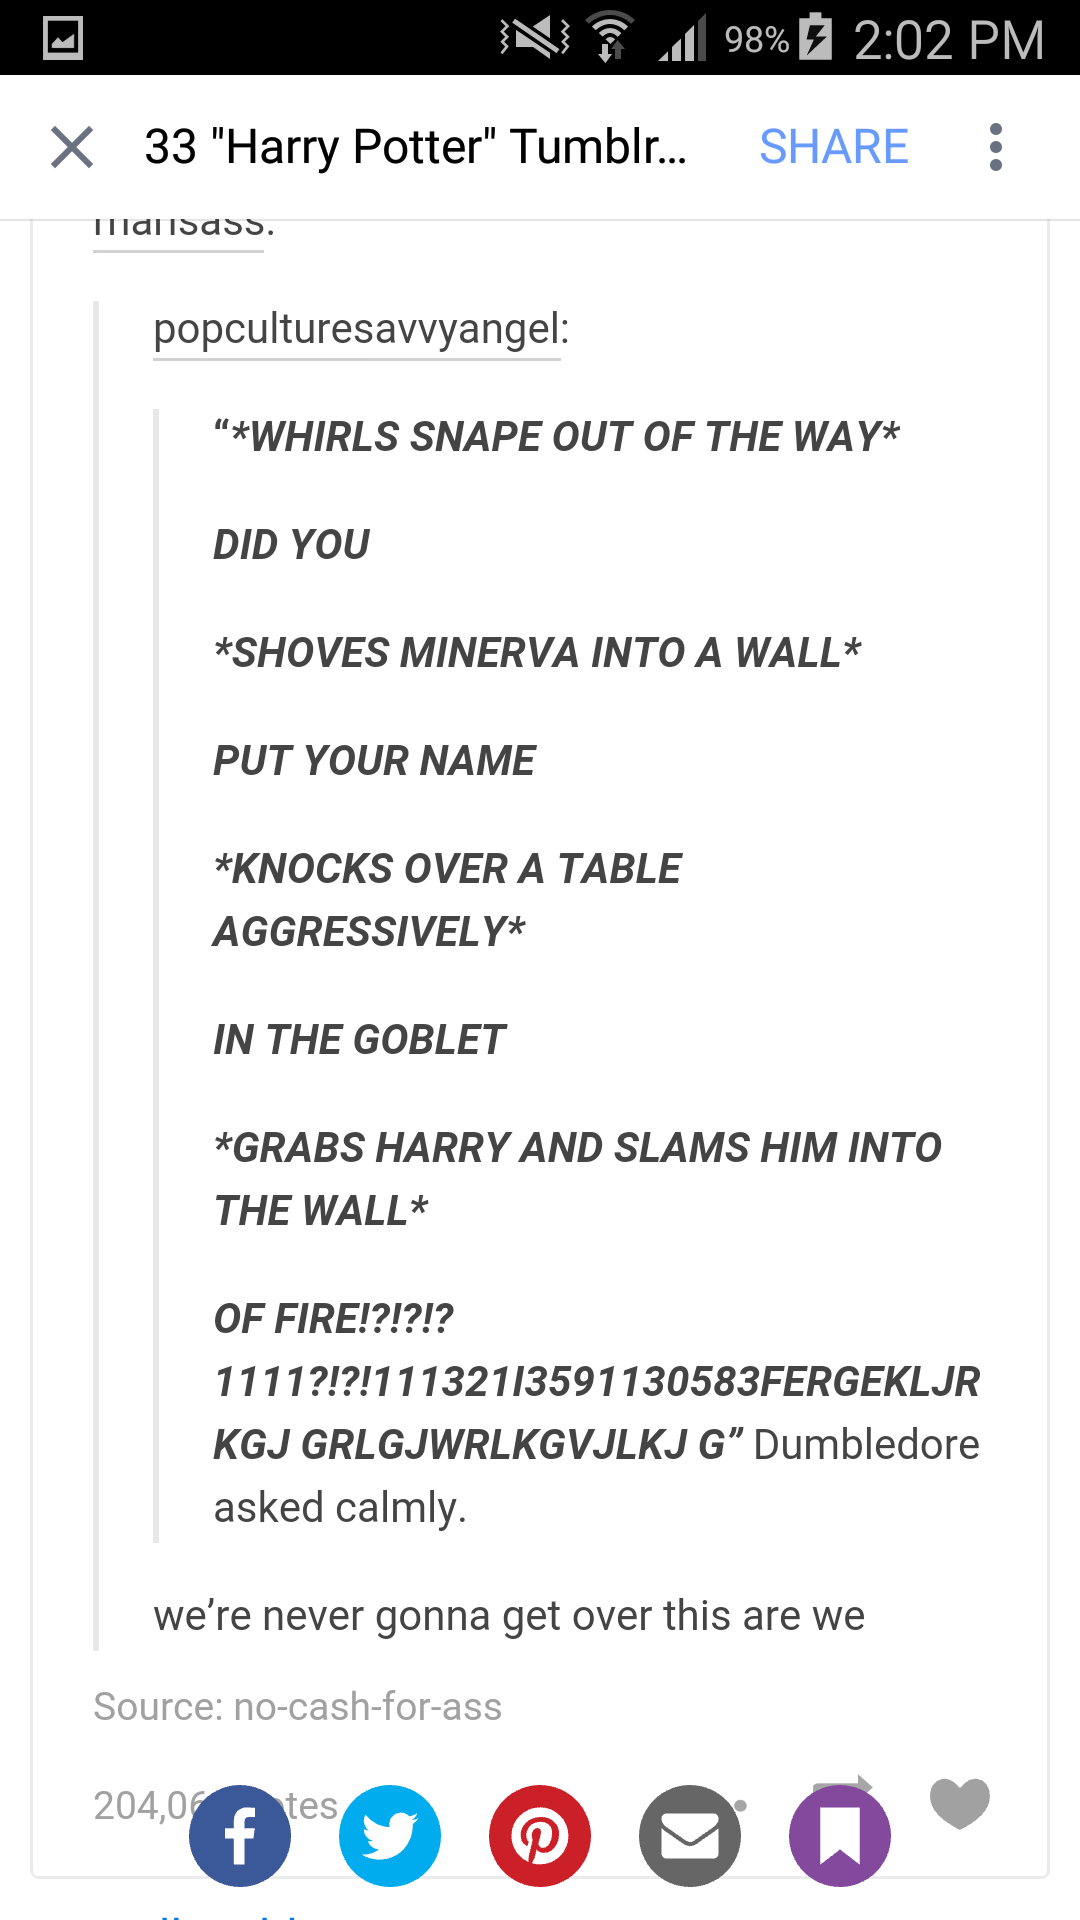 tumblr - screenshot - N 33 "Harry Potter" Tumblr... 98% x TifanTass. popculturesavvyangel Whirls Snape Out Of The Way Did You Shoves Minerva Into A Wall Put Your Name Knocks Over A Table Aggressively In The Goblet Grabs Harry And Slams Him Into The Wall O